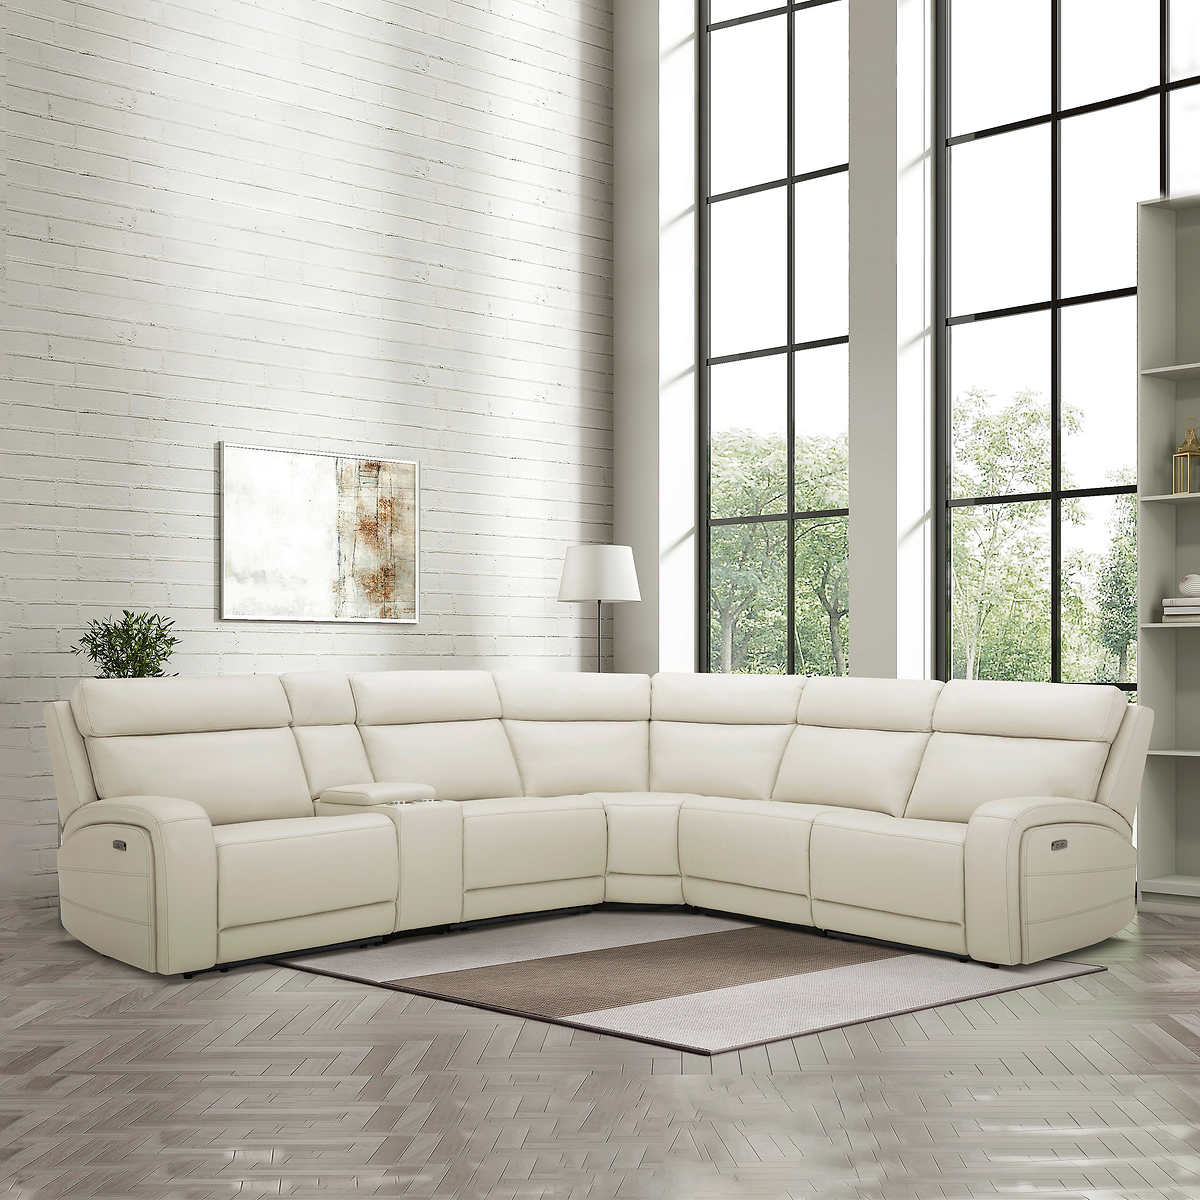 Leather Power Reclining Sectional, Danvors 7 Pc Leather Sectional Sofa With 4 Power Recliners